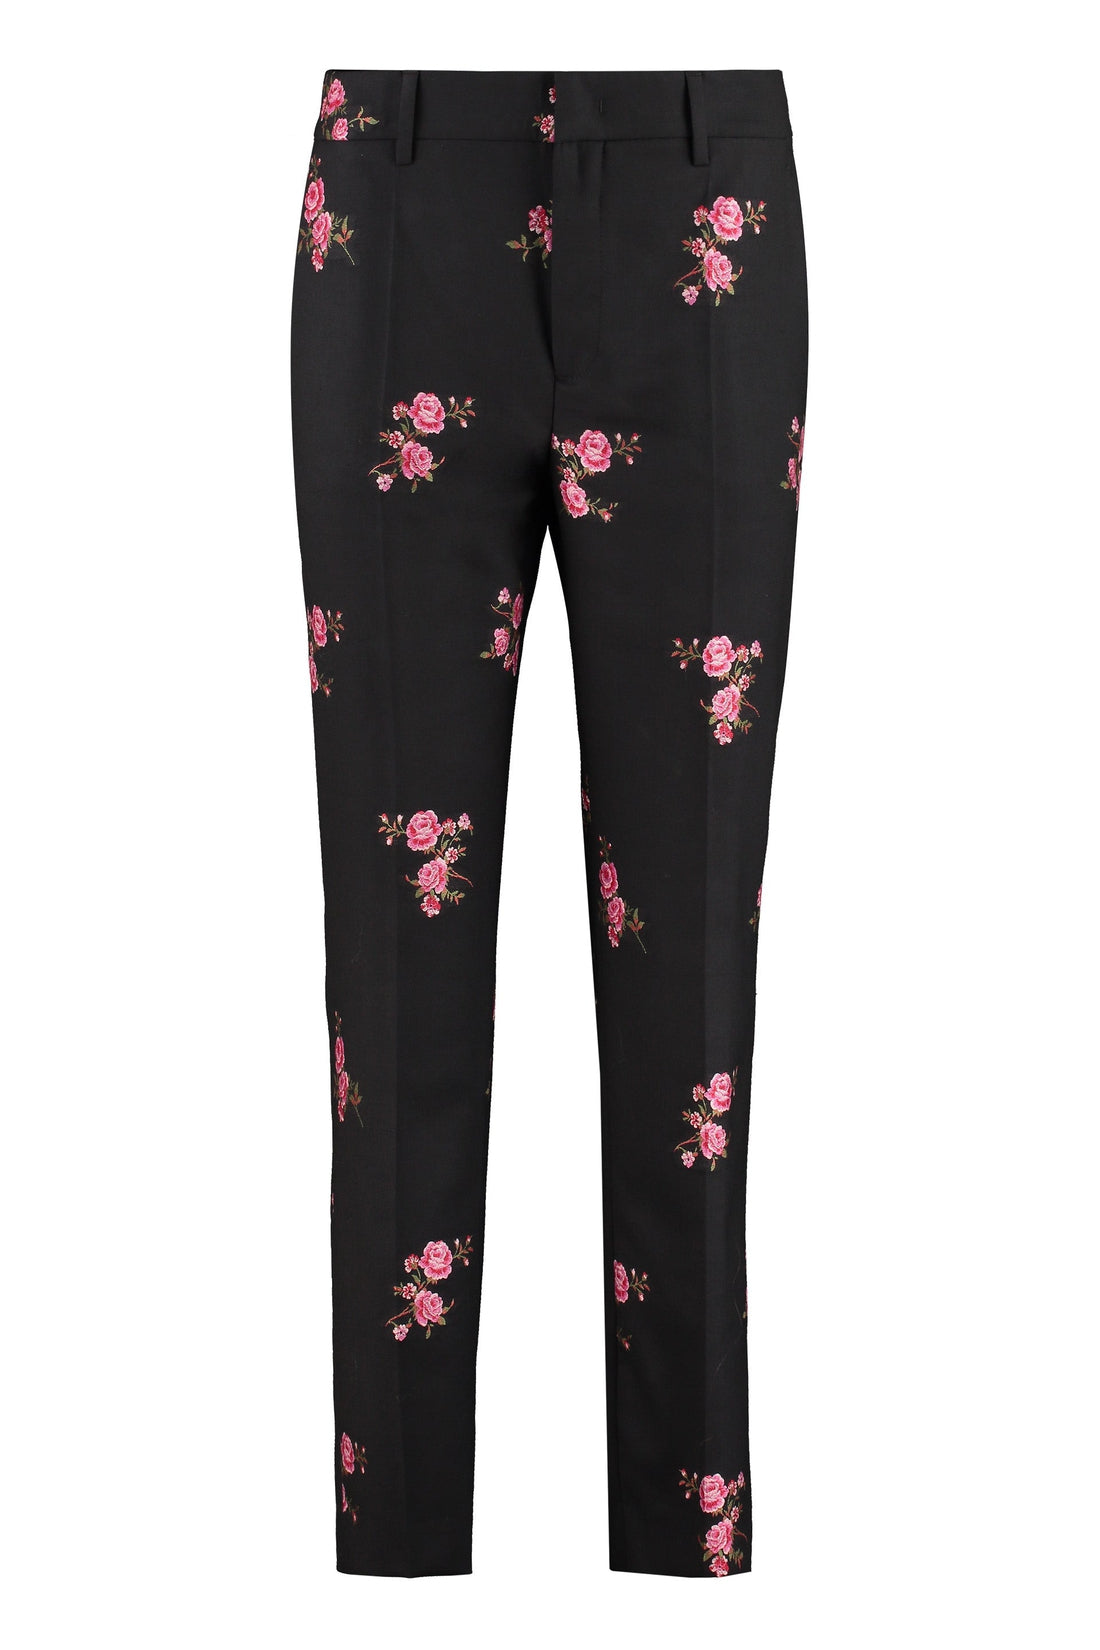 RED VALENTINO-OUTLET-SALE-Wool blend tailored trousers-ARCHIVIST